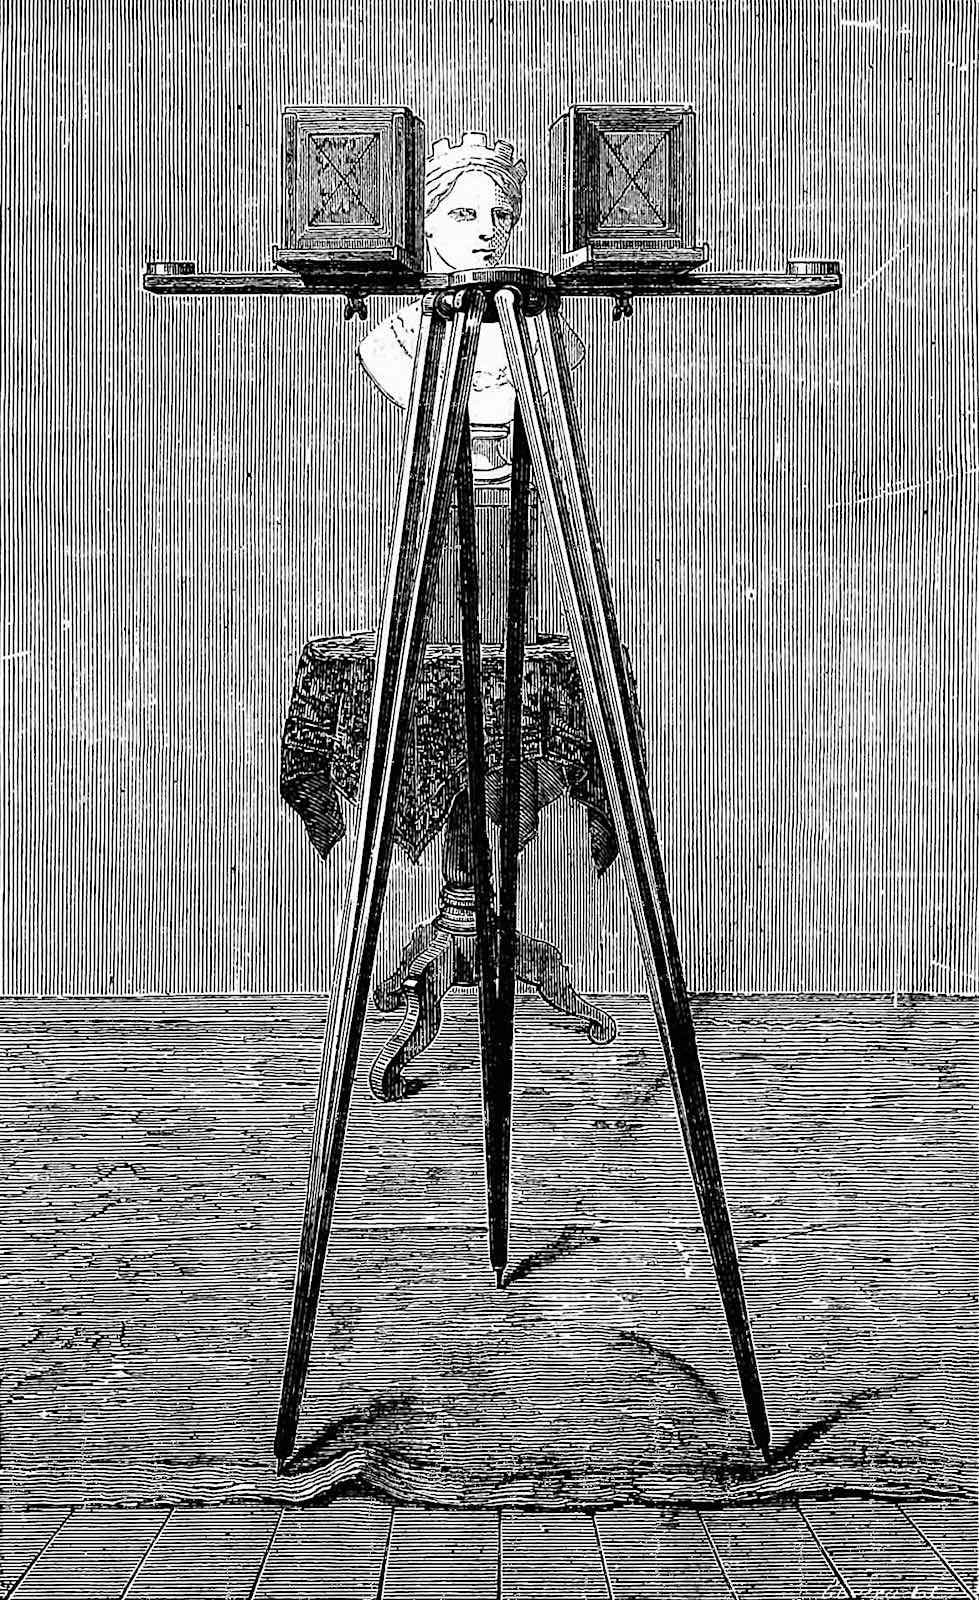 1867 stereoscopic photography, an illustration of the cameras